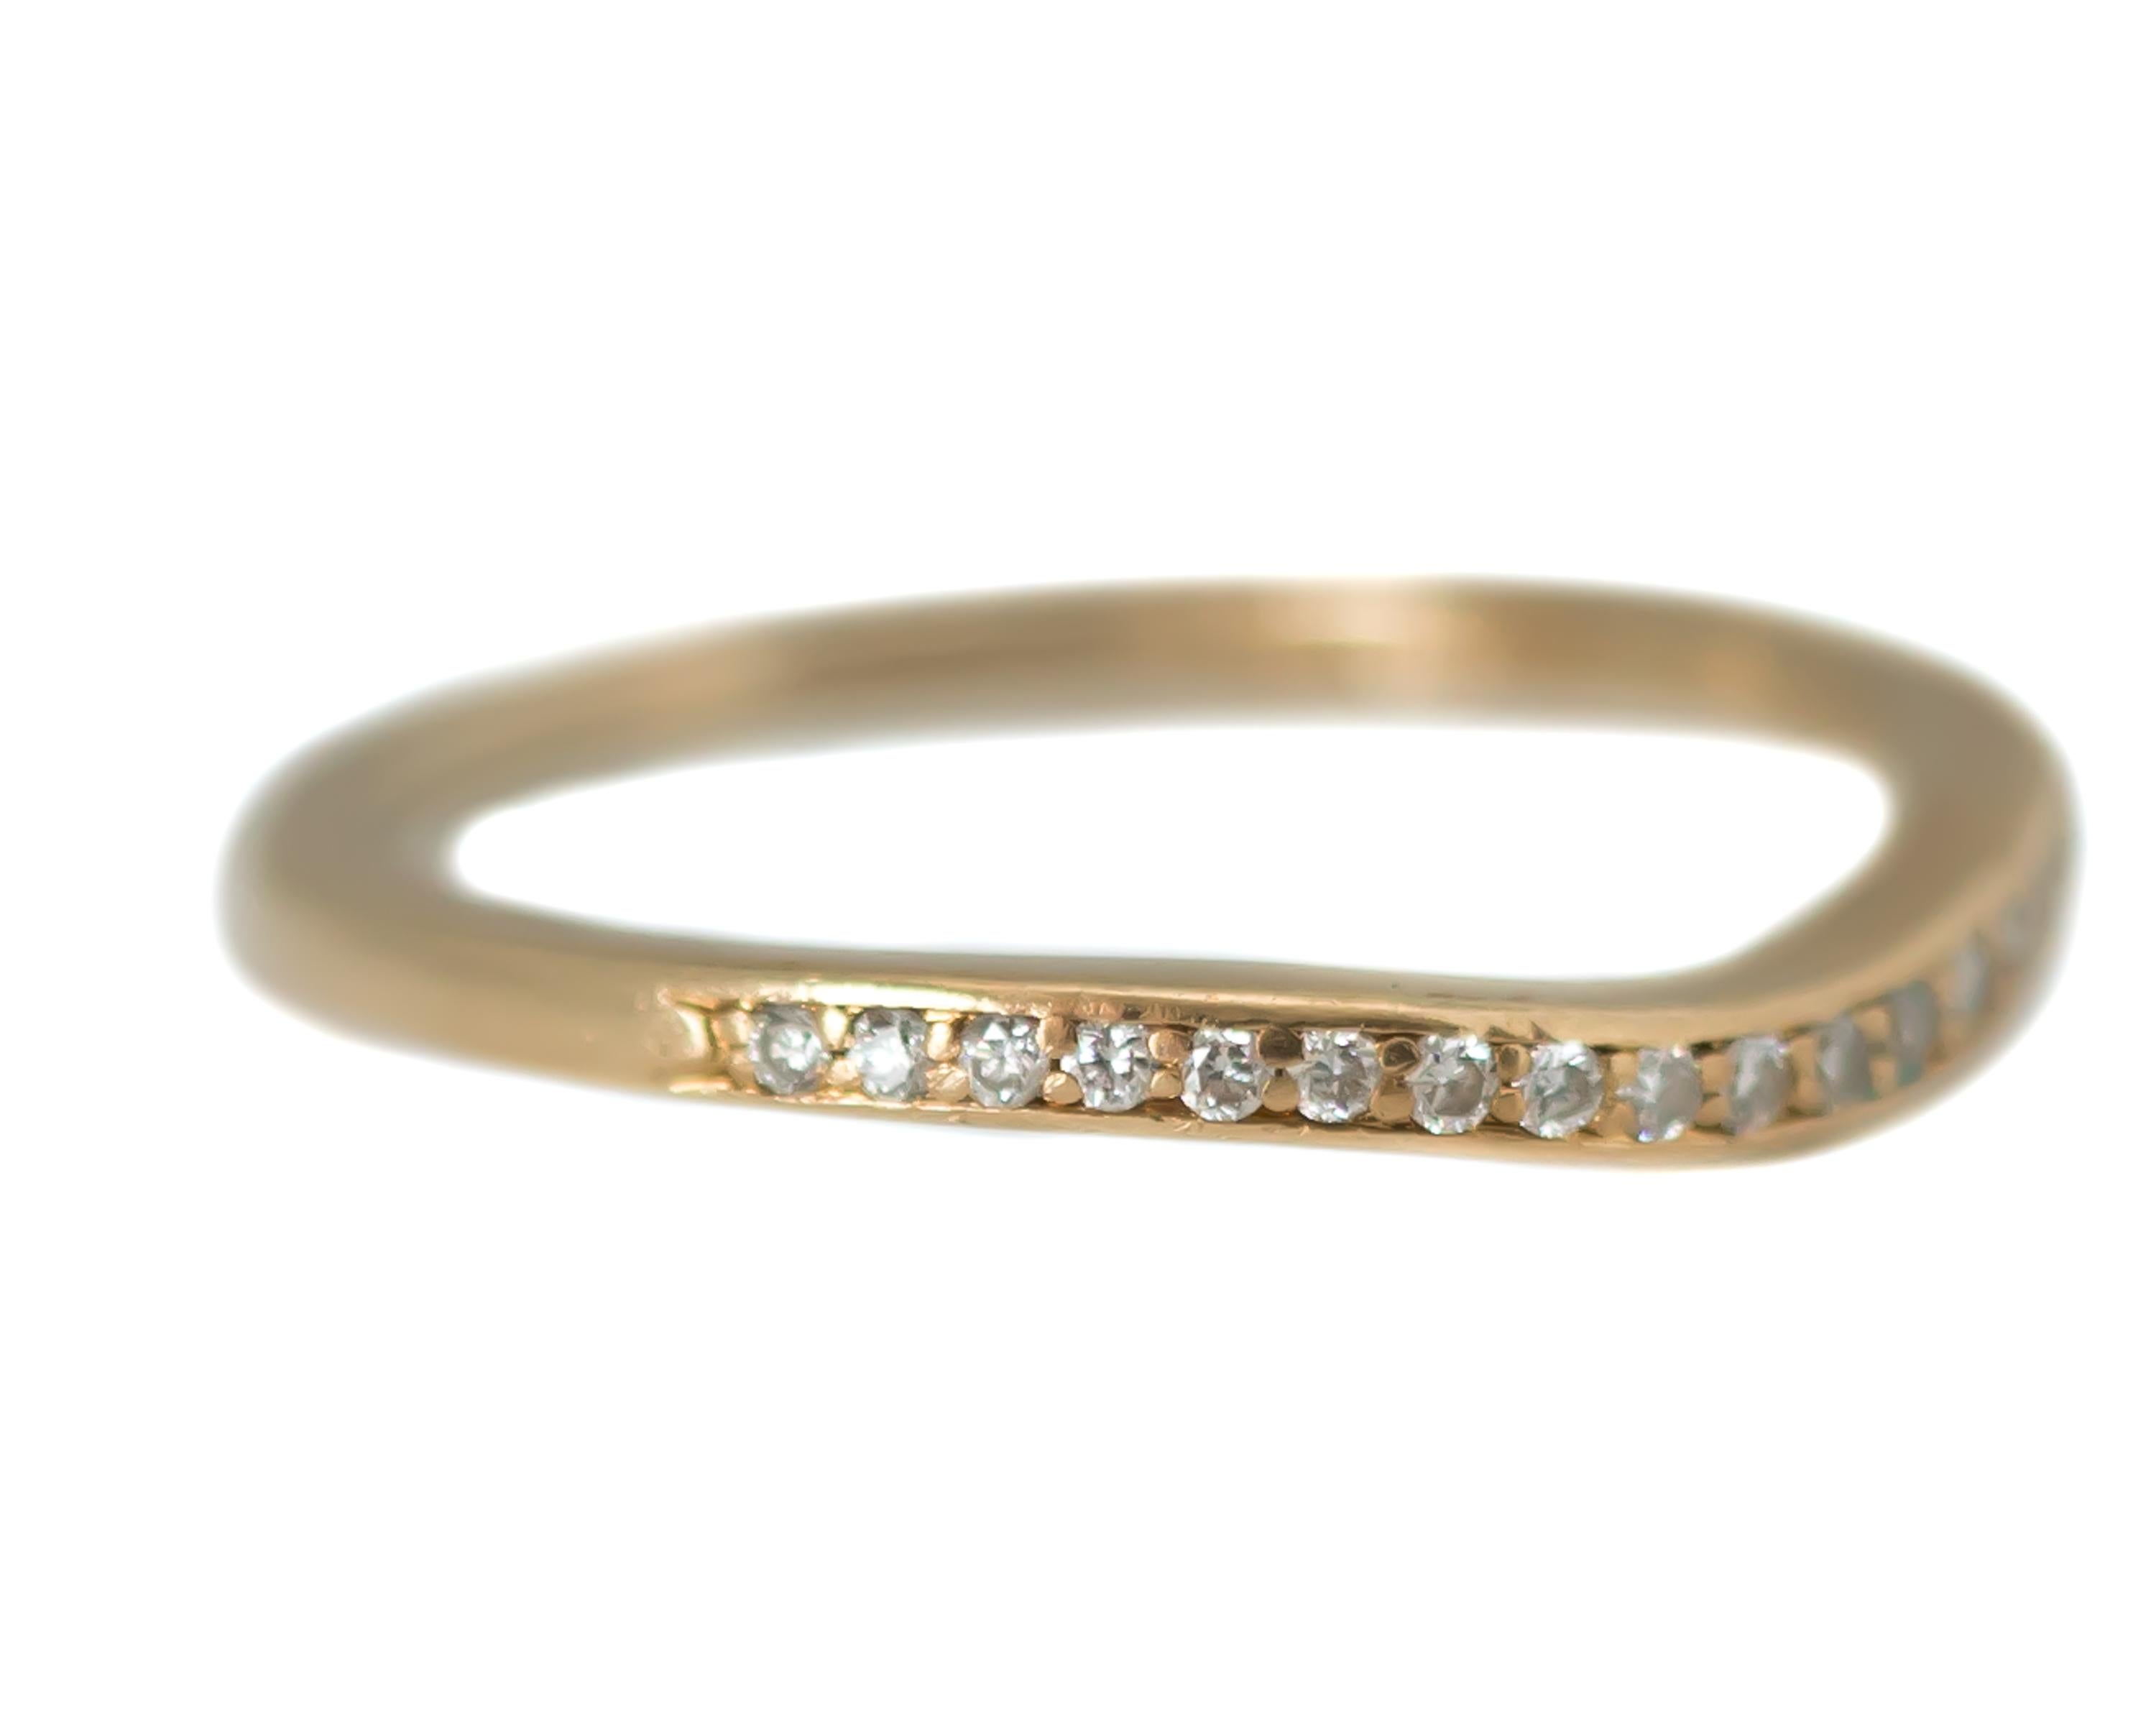 Curved Wedding Band - 14 Karat Yellow Gold, Diamonds

Features: 
0.20 carat total Round Brilliant Diamonds
14 Karat Yellow Gold setting
Curved front to accommodate an engagement ring
Prong set stones
1.5 millimeter wide band
2 millimeters finger to